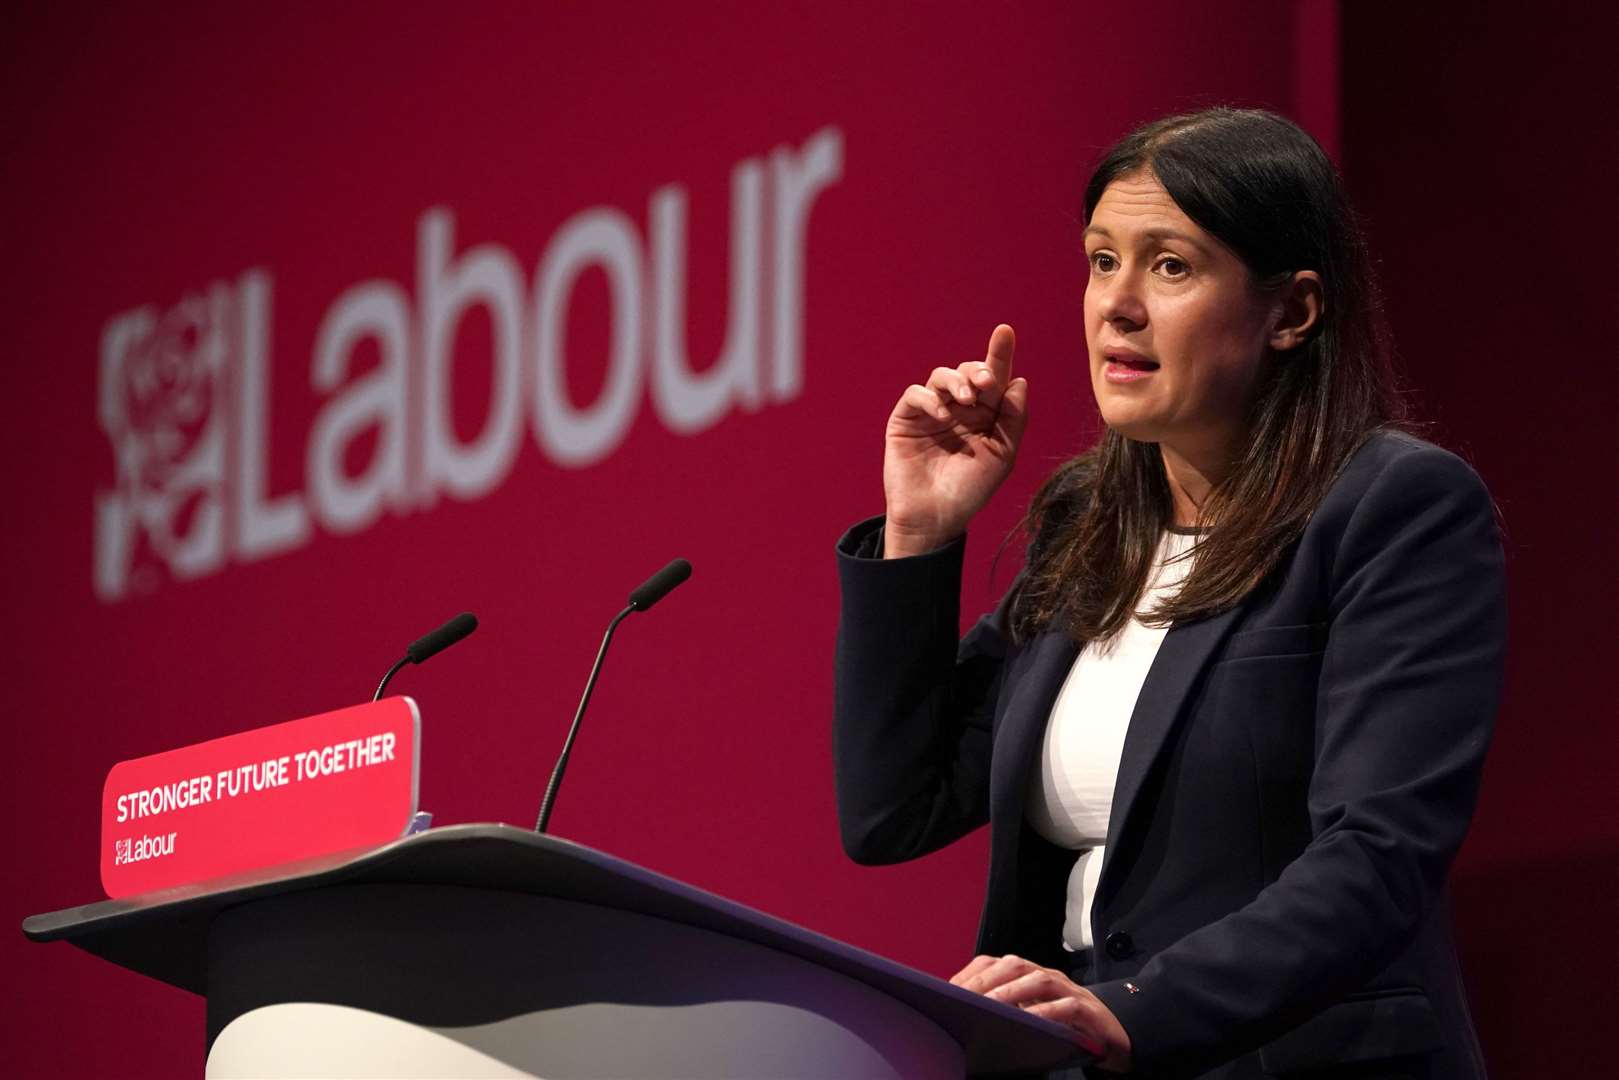 Labour MP Lisa Nandy was among those calling for an investigation (PA)